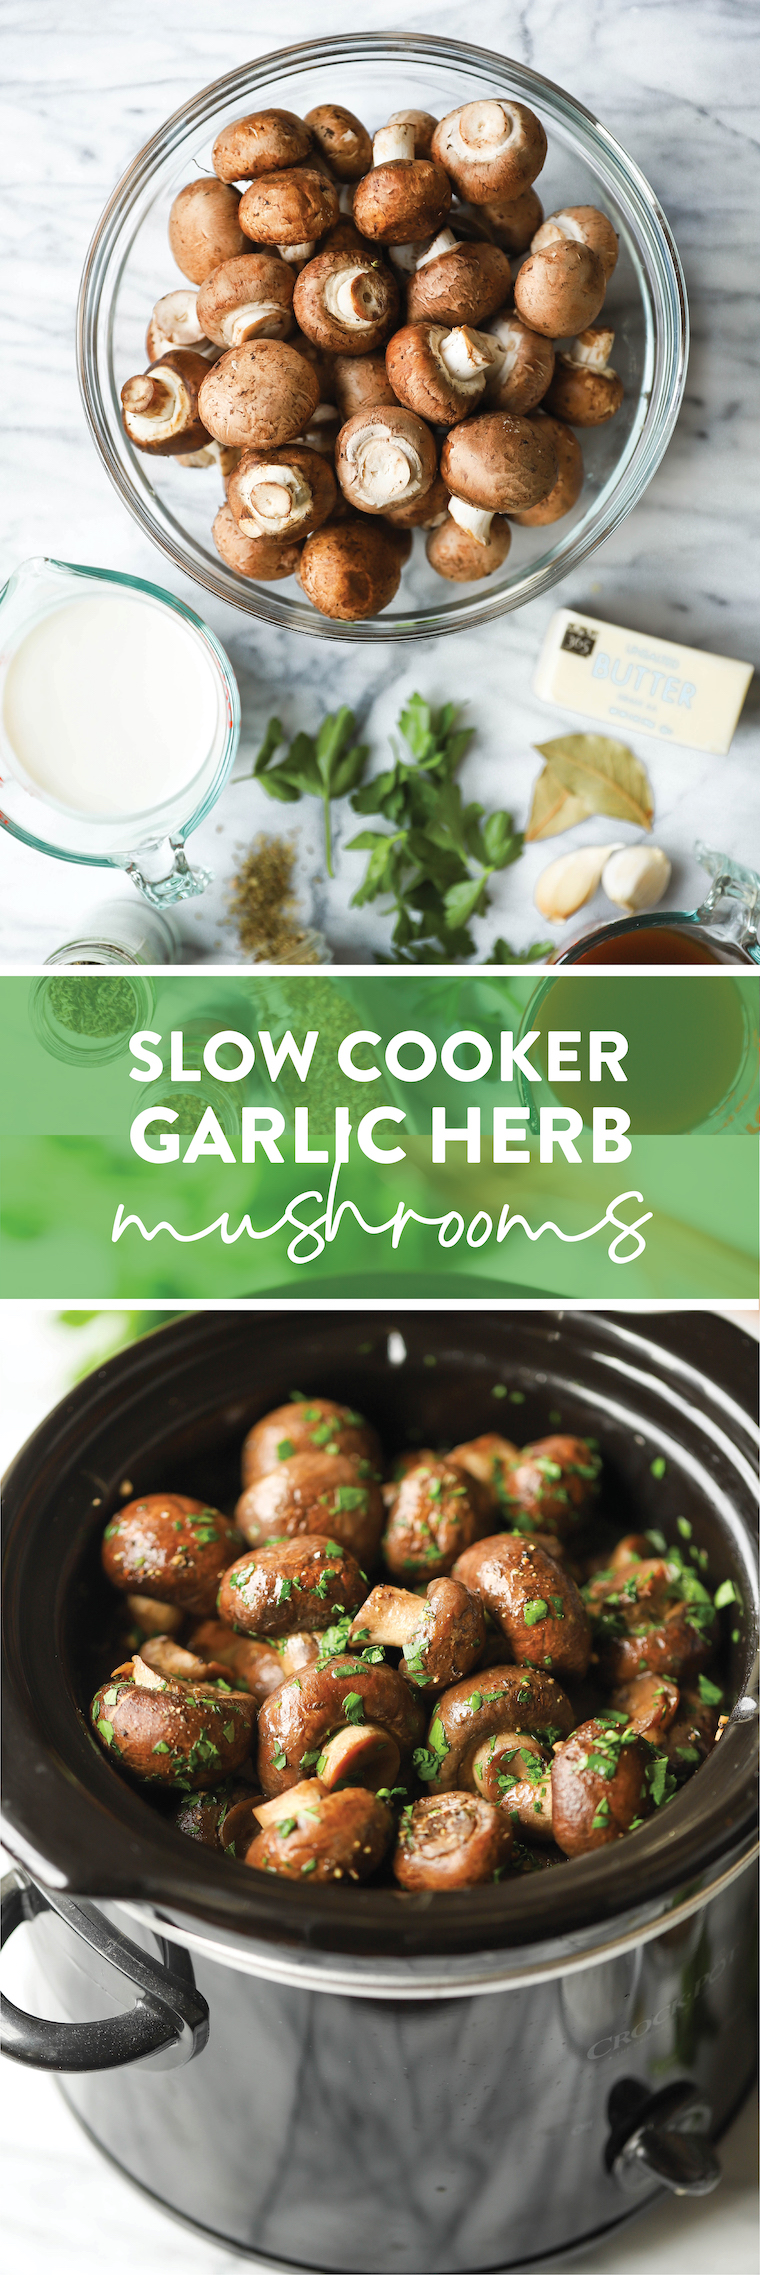 Slow Cooker Garlic Herb Mushrooms - The best and EASIEST way to make mushrooms. In a crockpot with garlic, herbs and butter! Just 5 min prep.